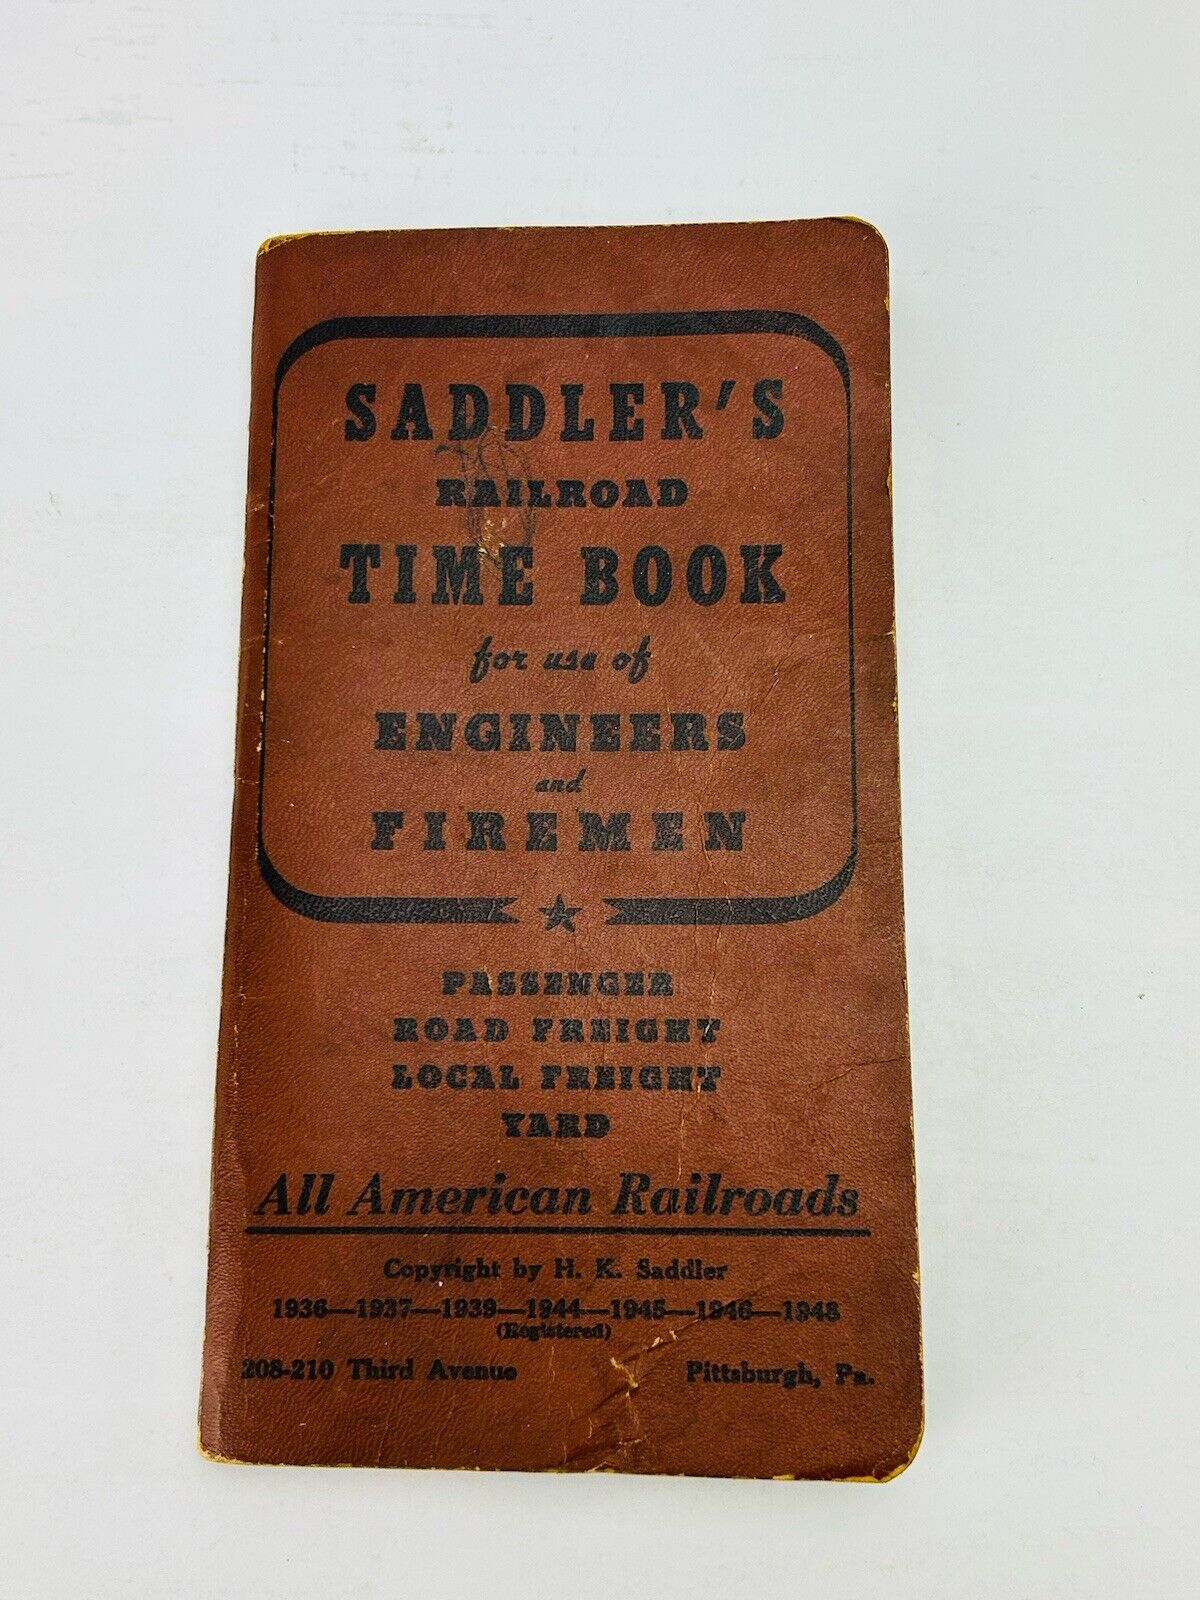 Saddler’s Railroad Time Book For Use Of Engineers And Firemen 1948